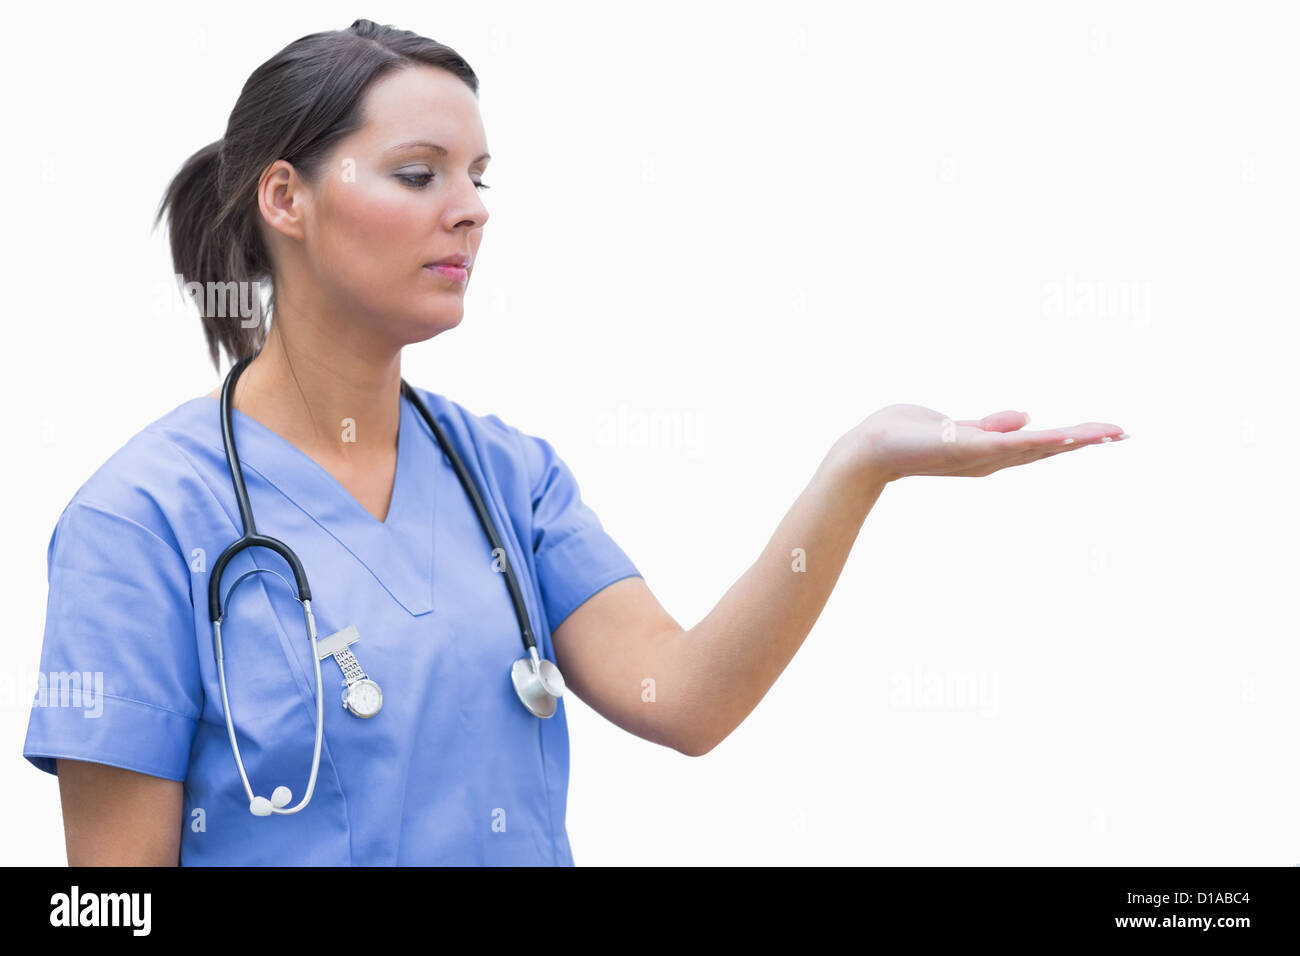 Female surgeon holding out open palm Stock Photo